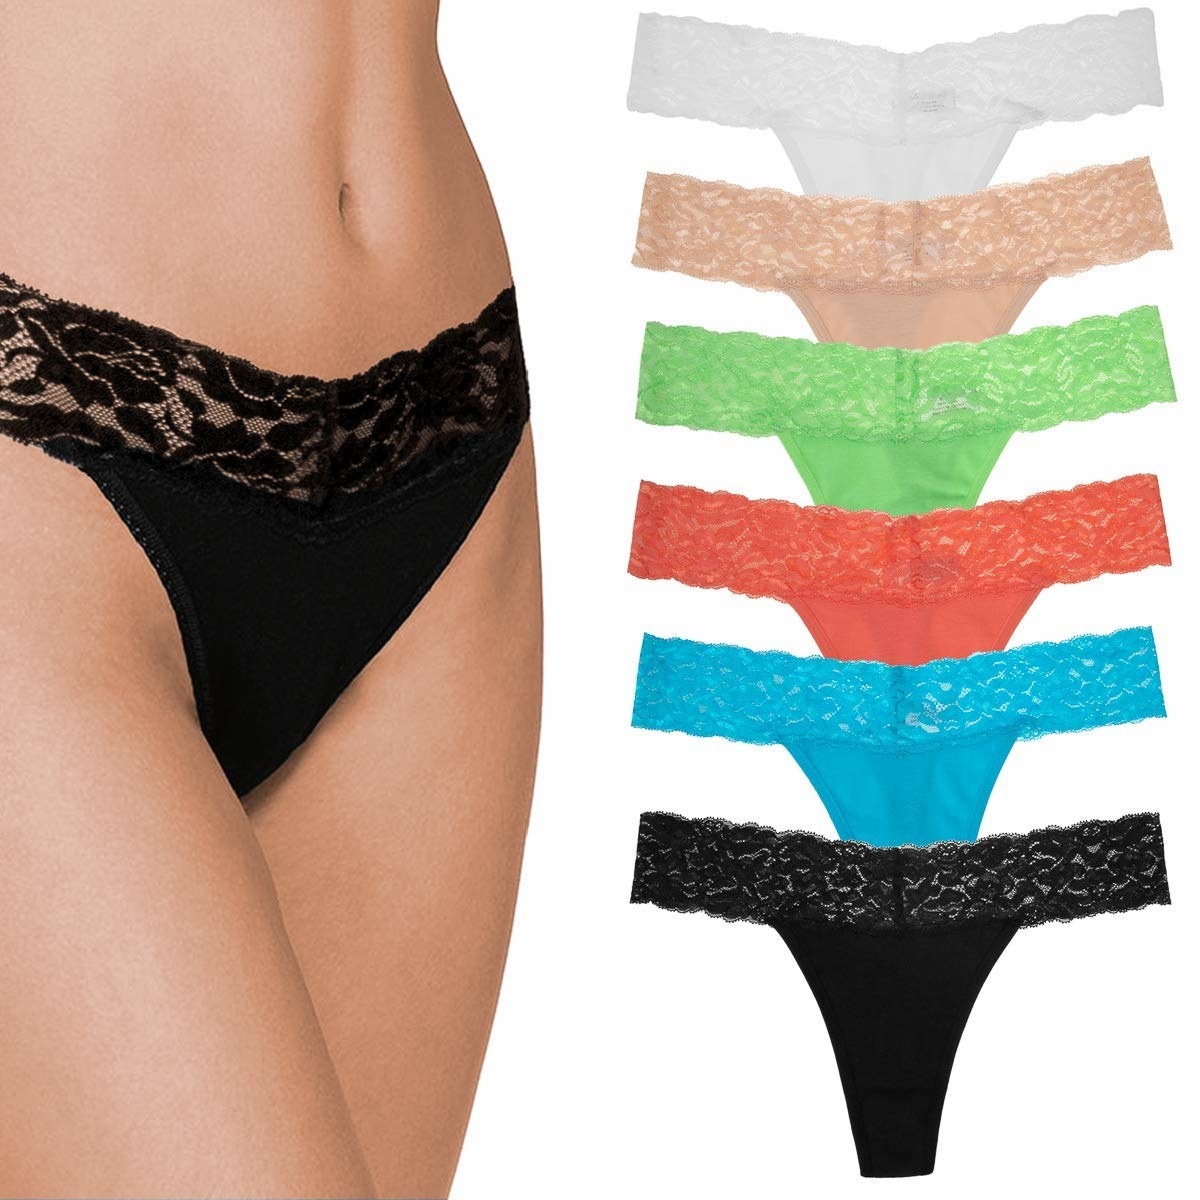 A model wearing the lace panties in black next to the color varieties in a pack